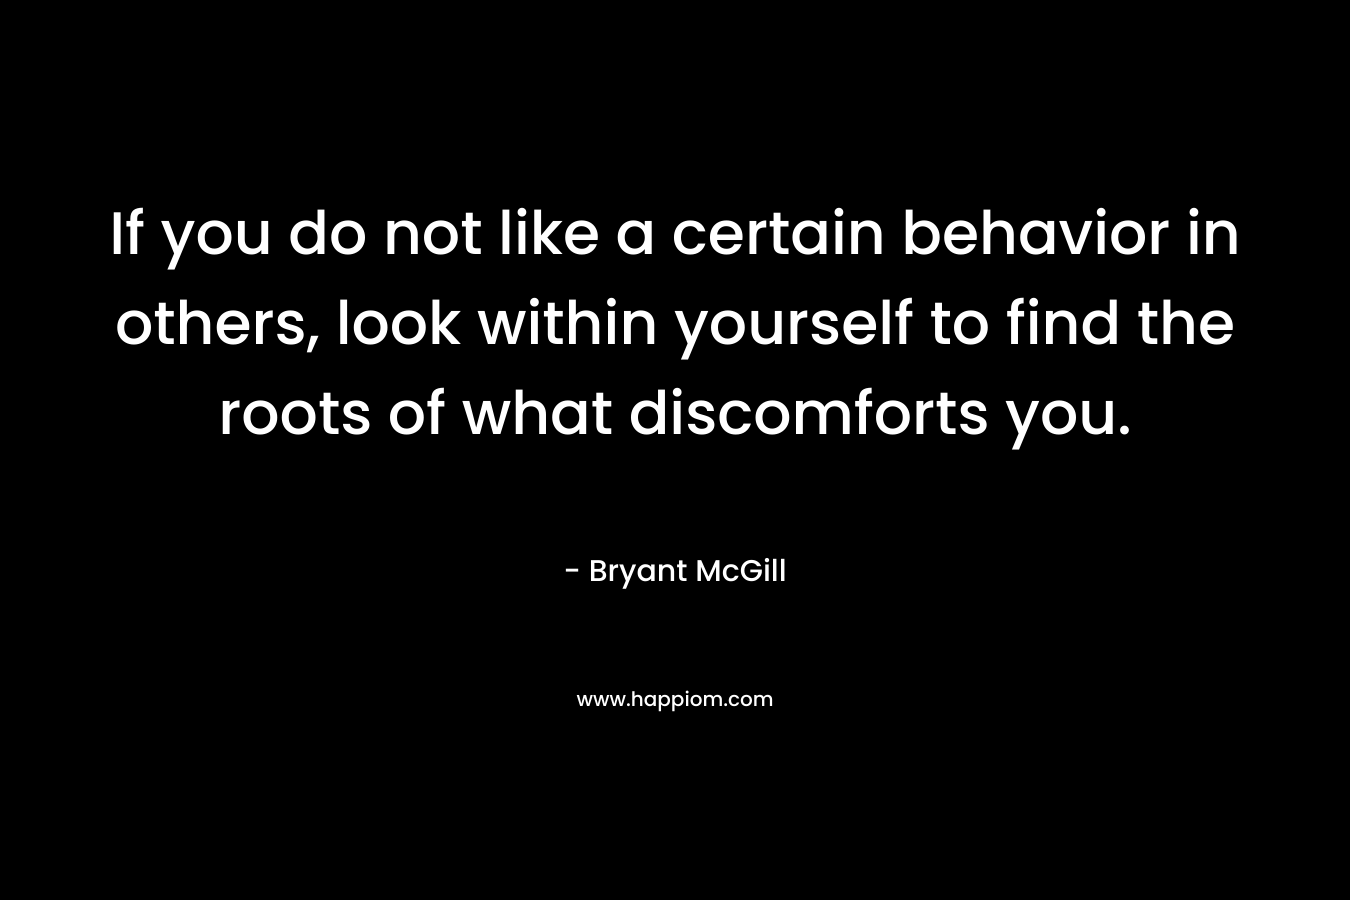 If you do not like a certain behavior in others, look within yourself to find the roots of what discomforts you. – Bryant McGill